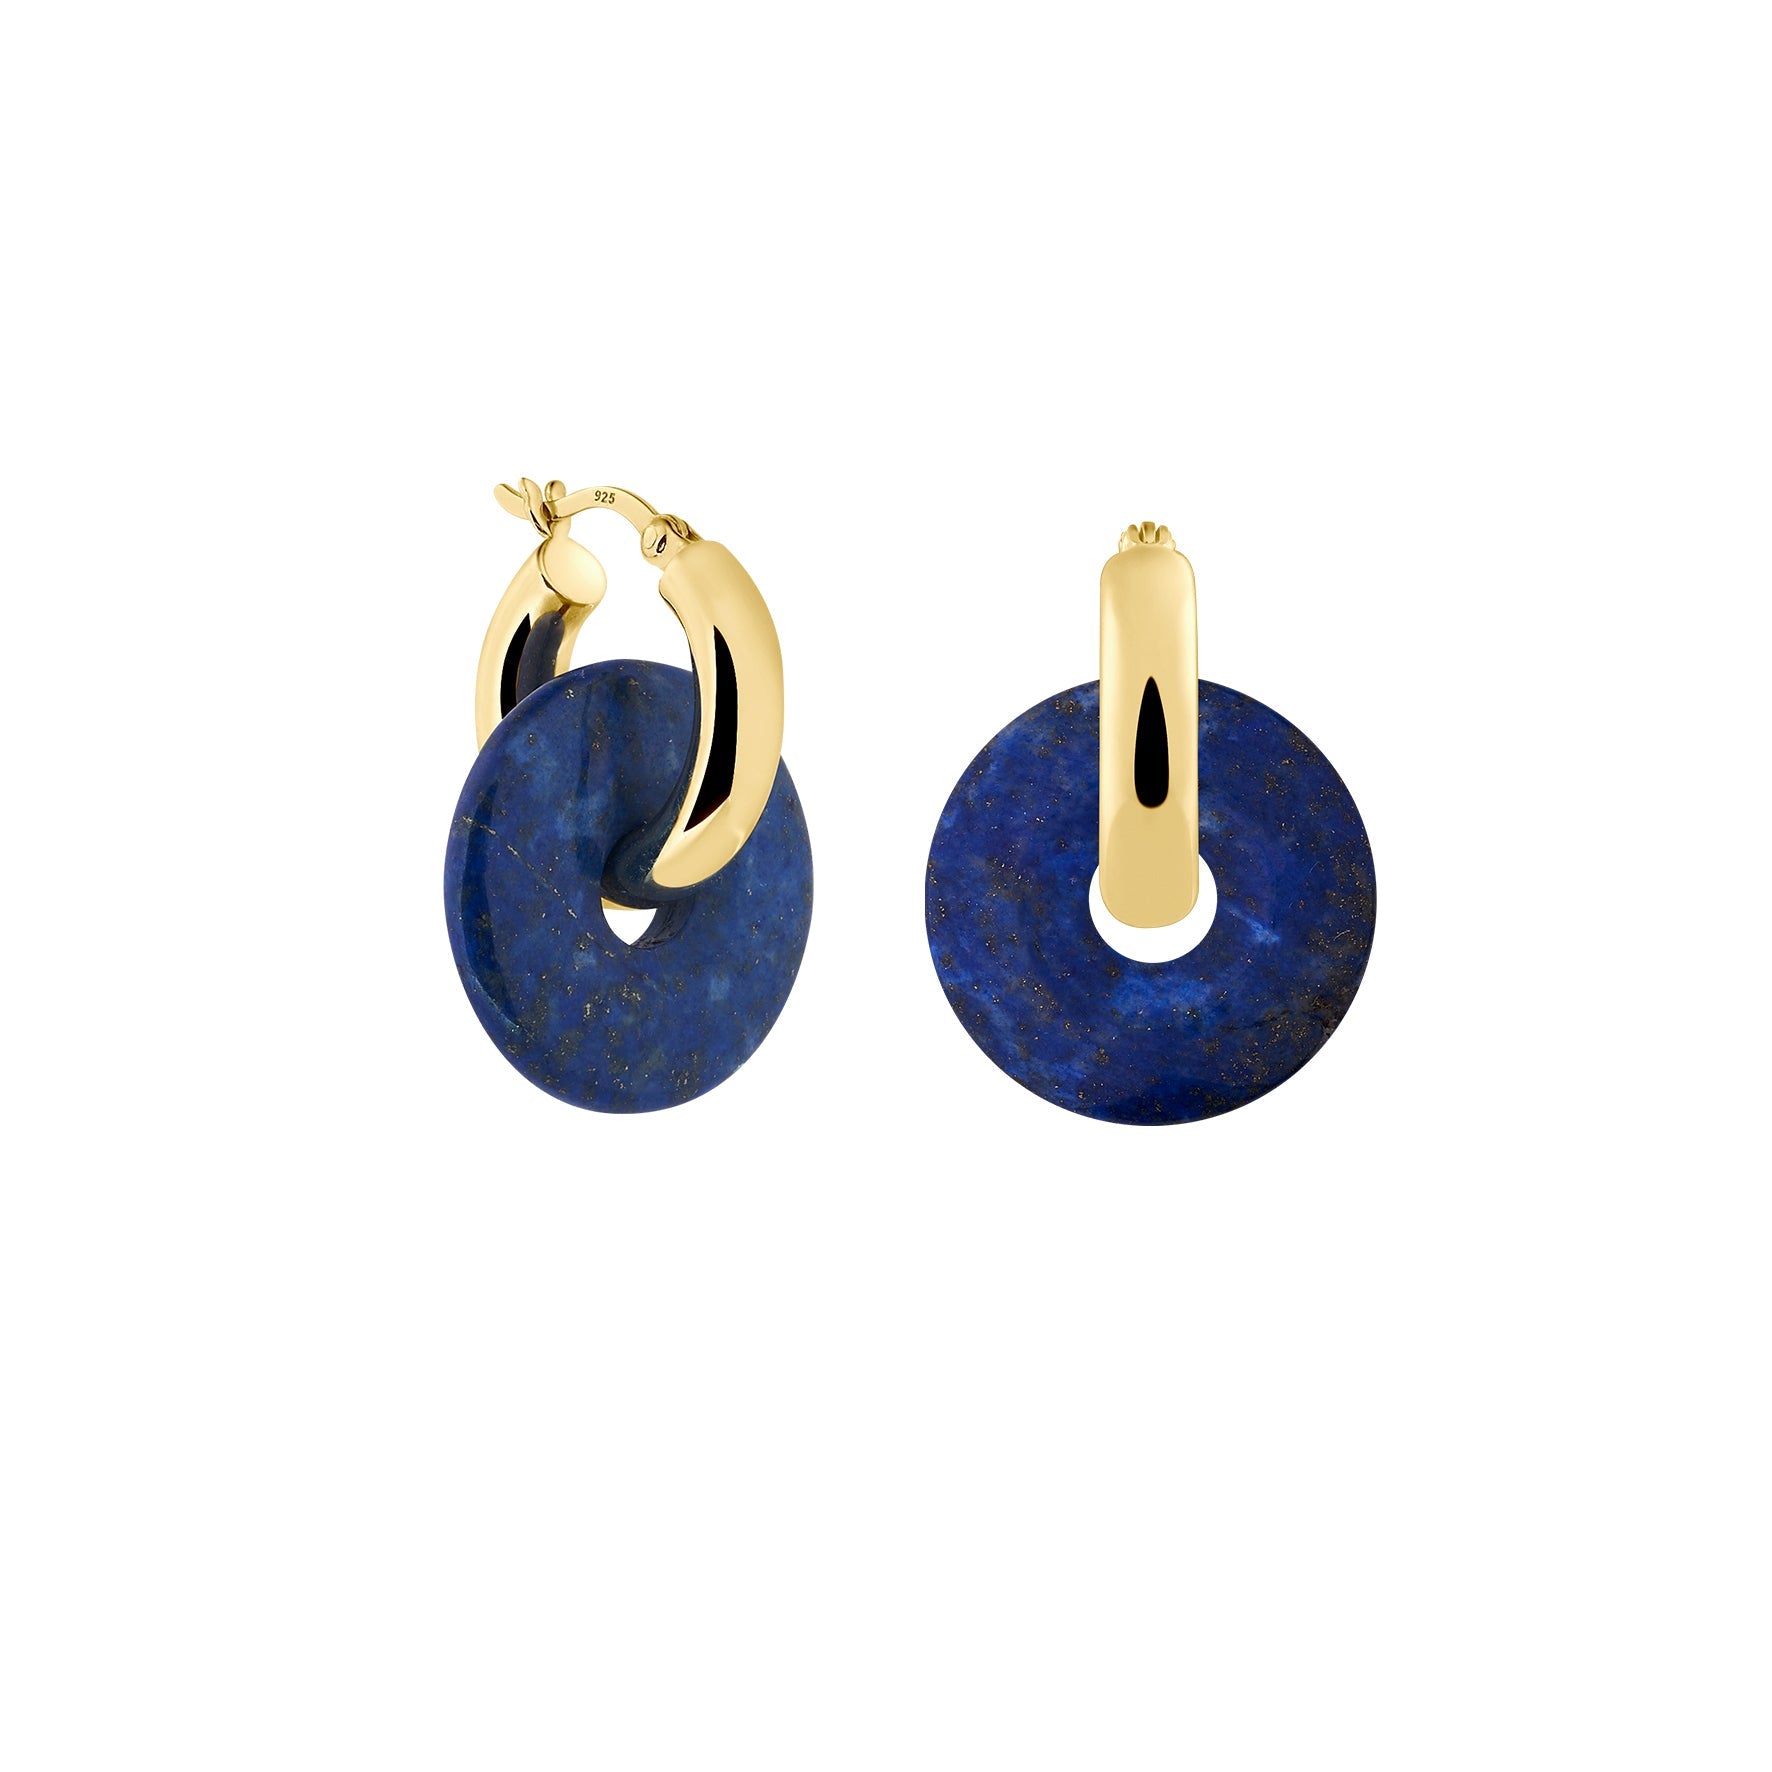 18K GOLD PLATED CREOLES WITH LAPIS GEMSTONES